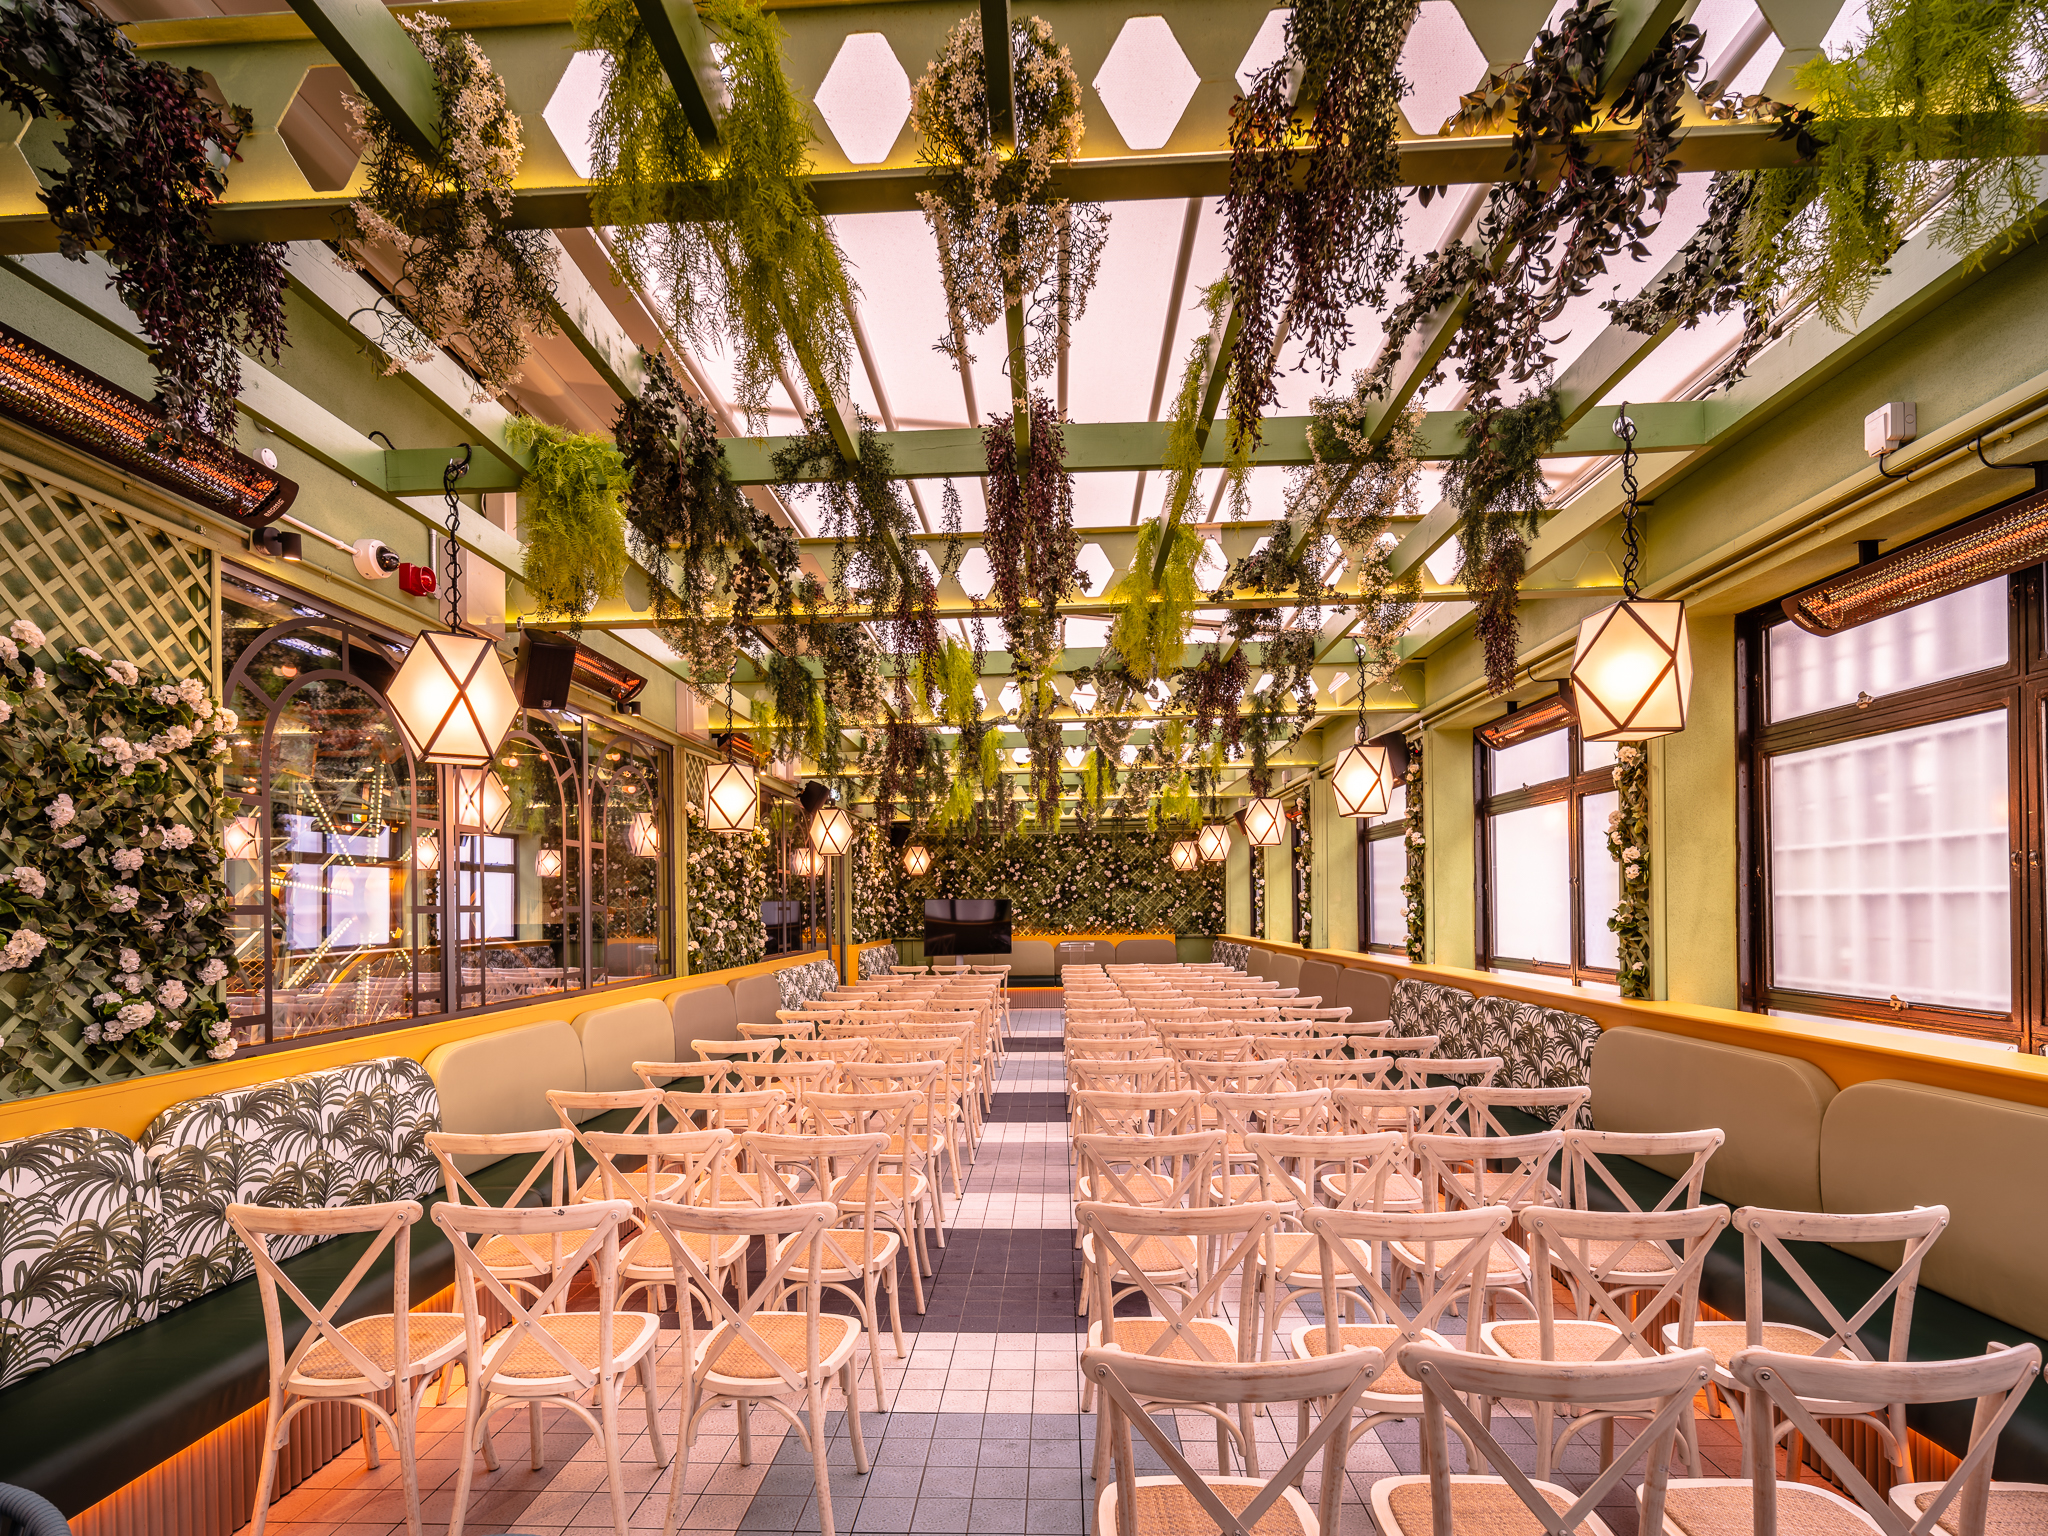 The Terrace room at Swingers West End, filled with rows of white chairs and botanical decorations.